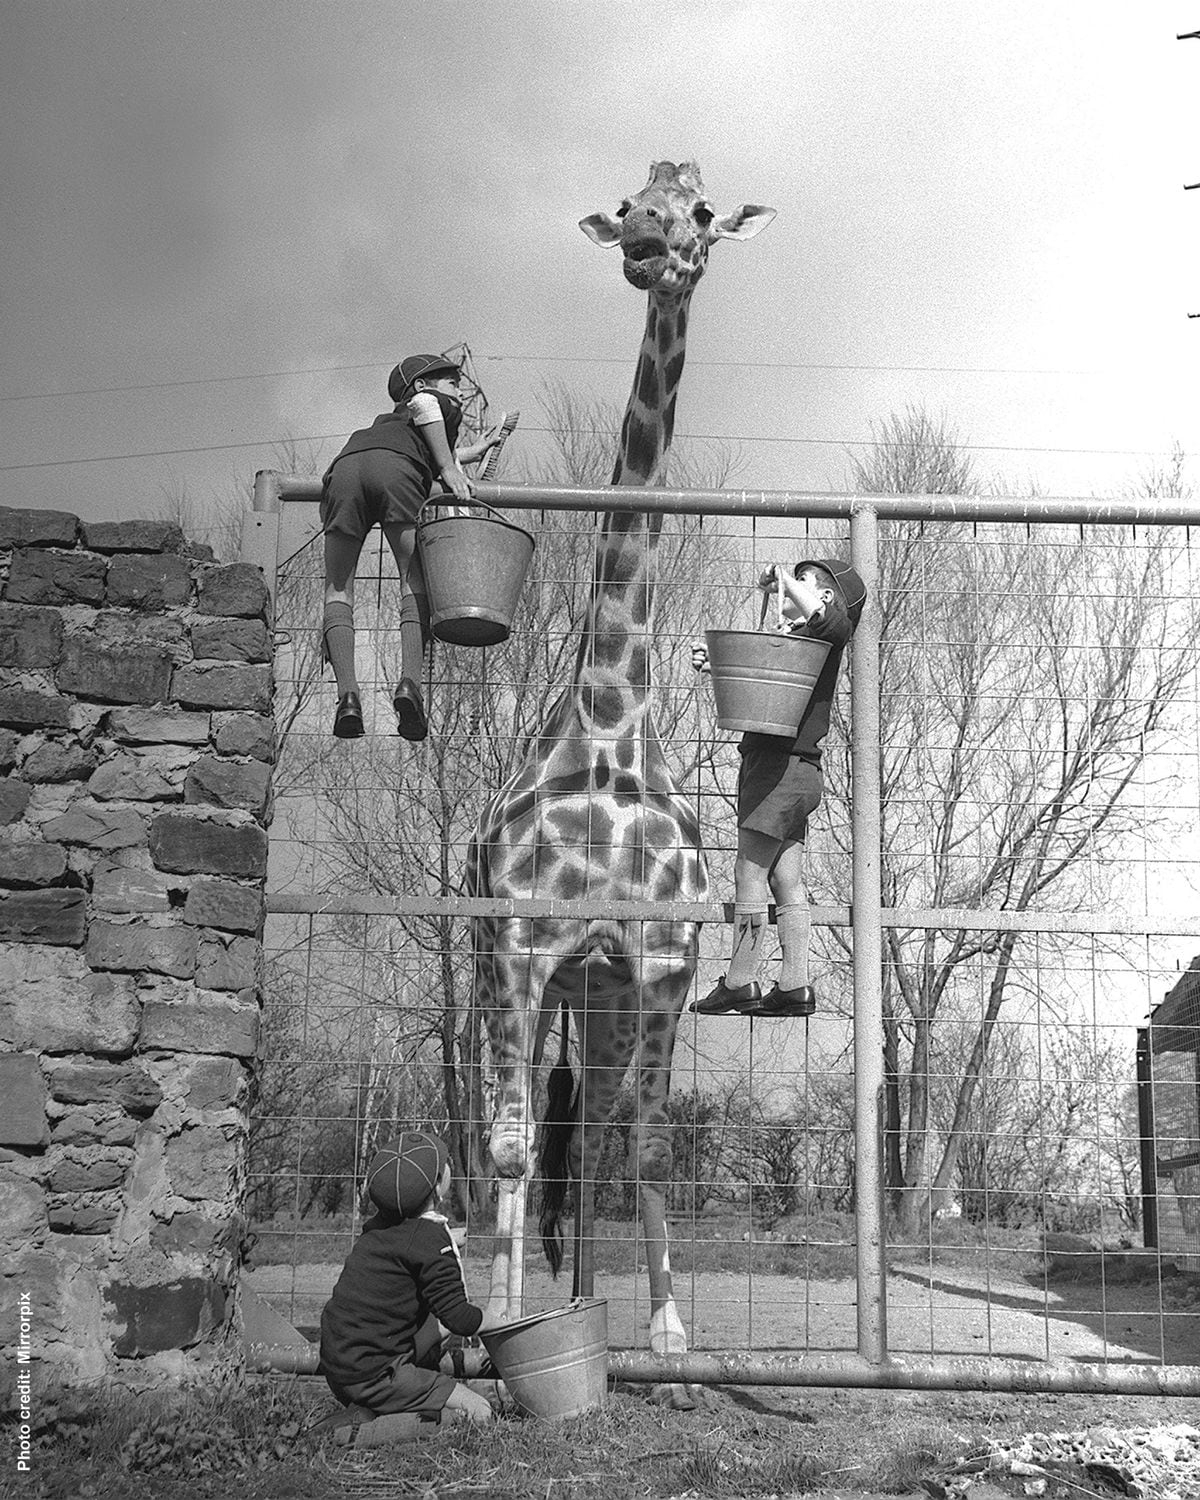 1960 - The tallest giraffe ever recorded (at the time) was a Masai bull living at Chester Zoo, named George. He featured in the Guinness Book of Records and measured just under 20 feet in height.